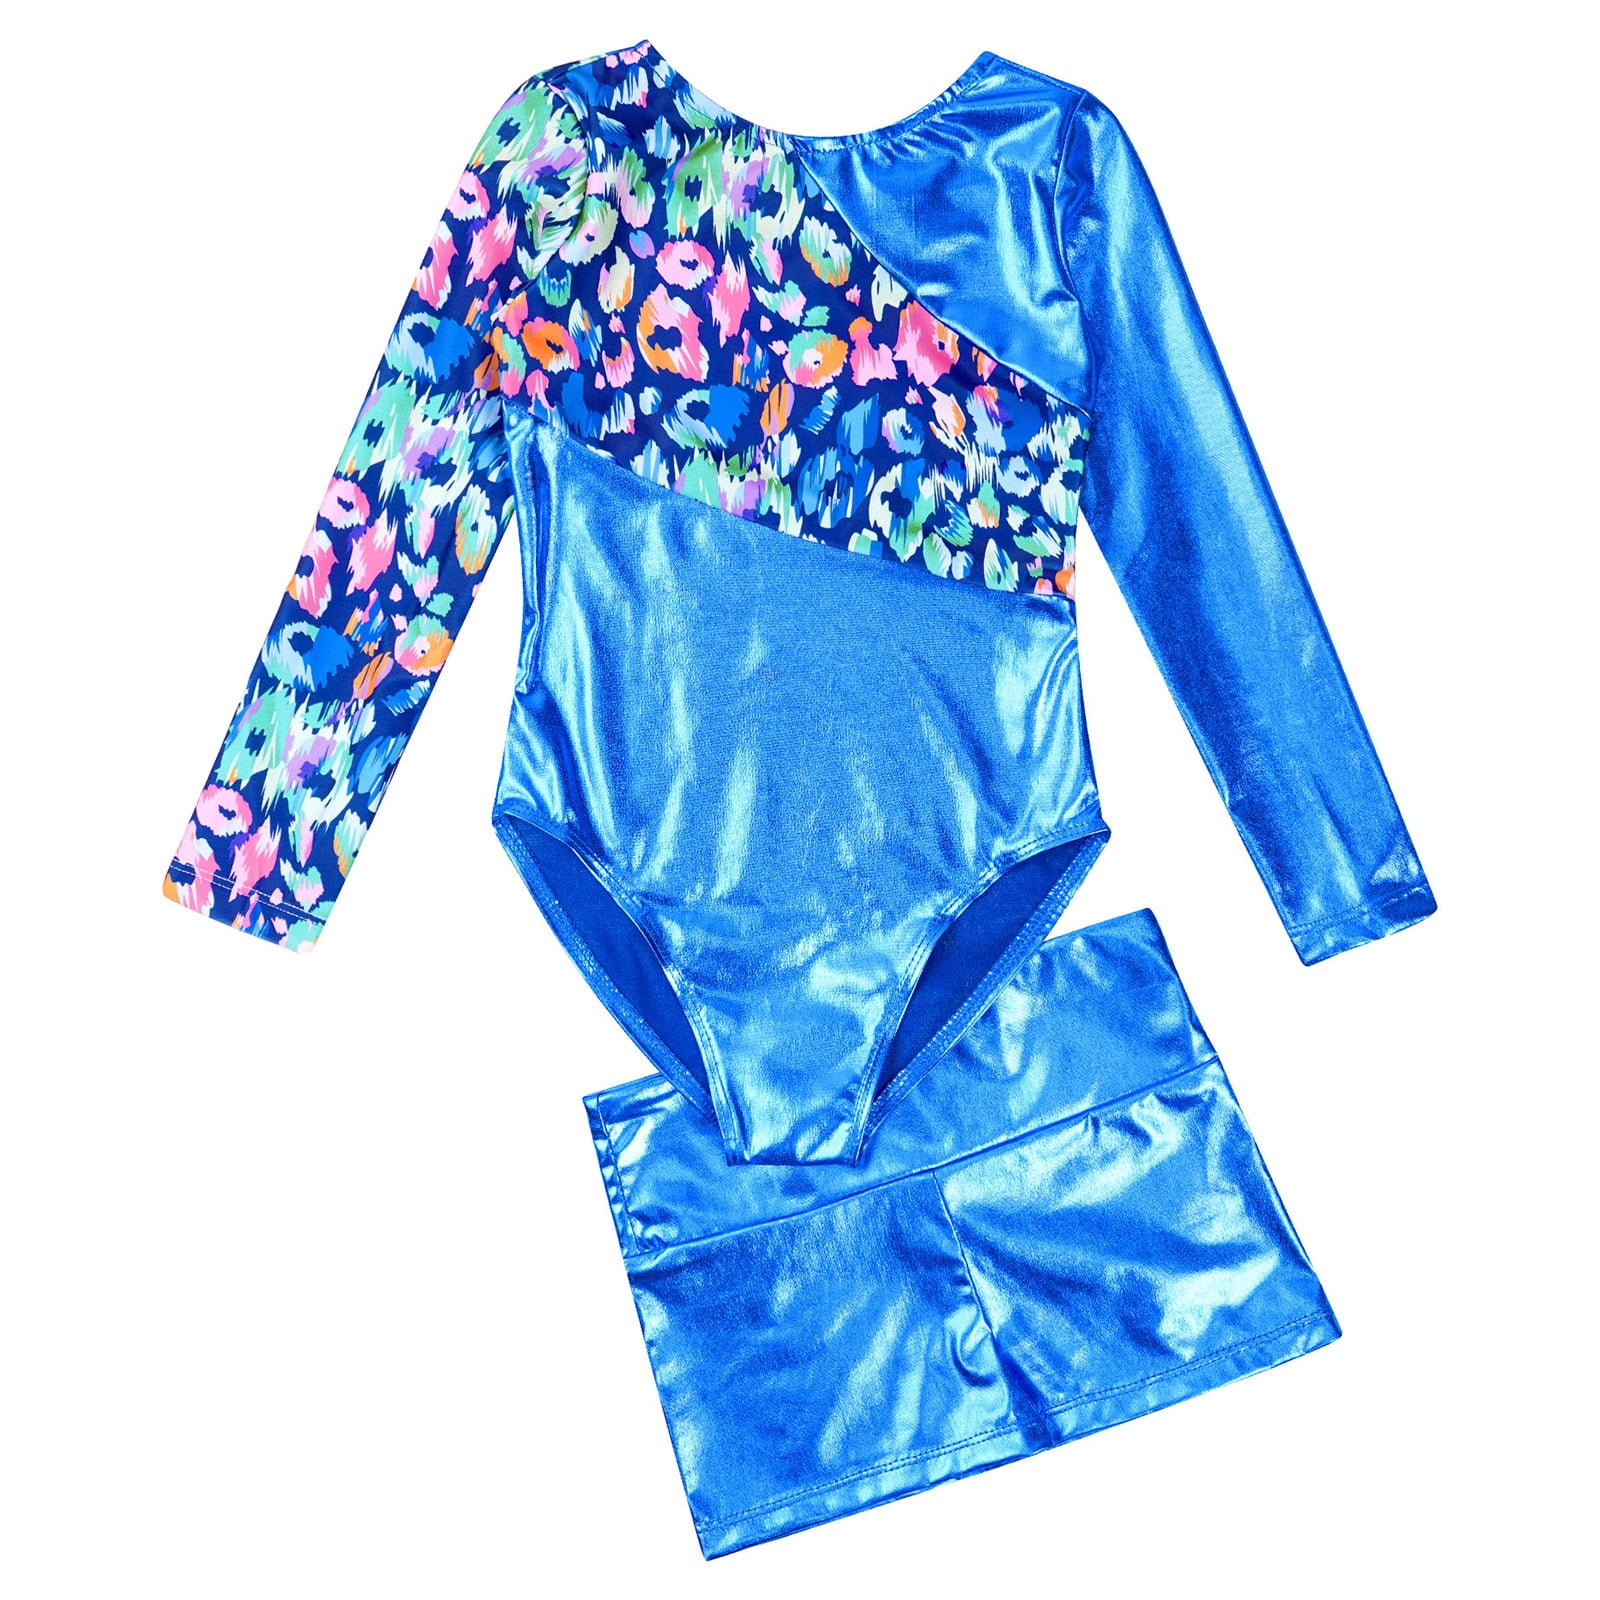 inhzoy Girls Gymnastics Leotards with Athletic Shorts Dance Outfits ...